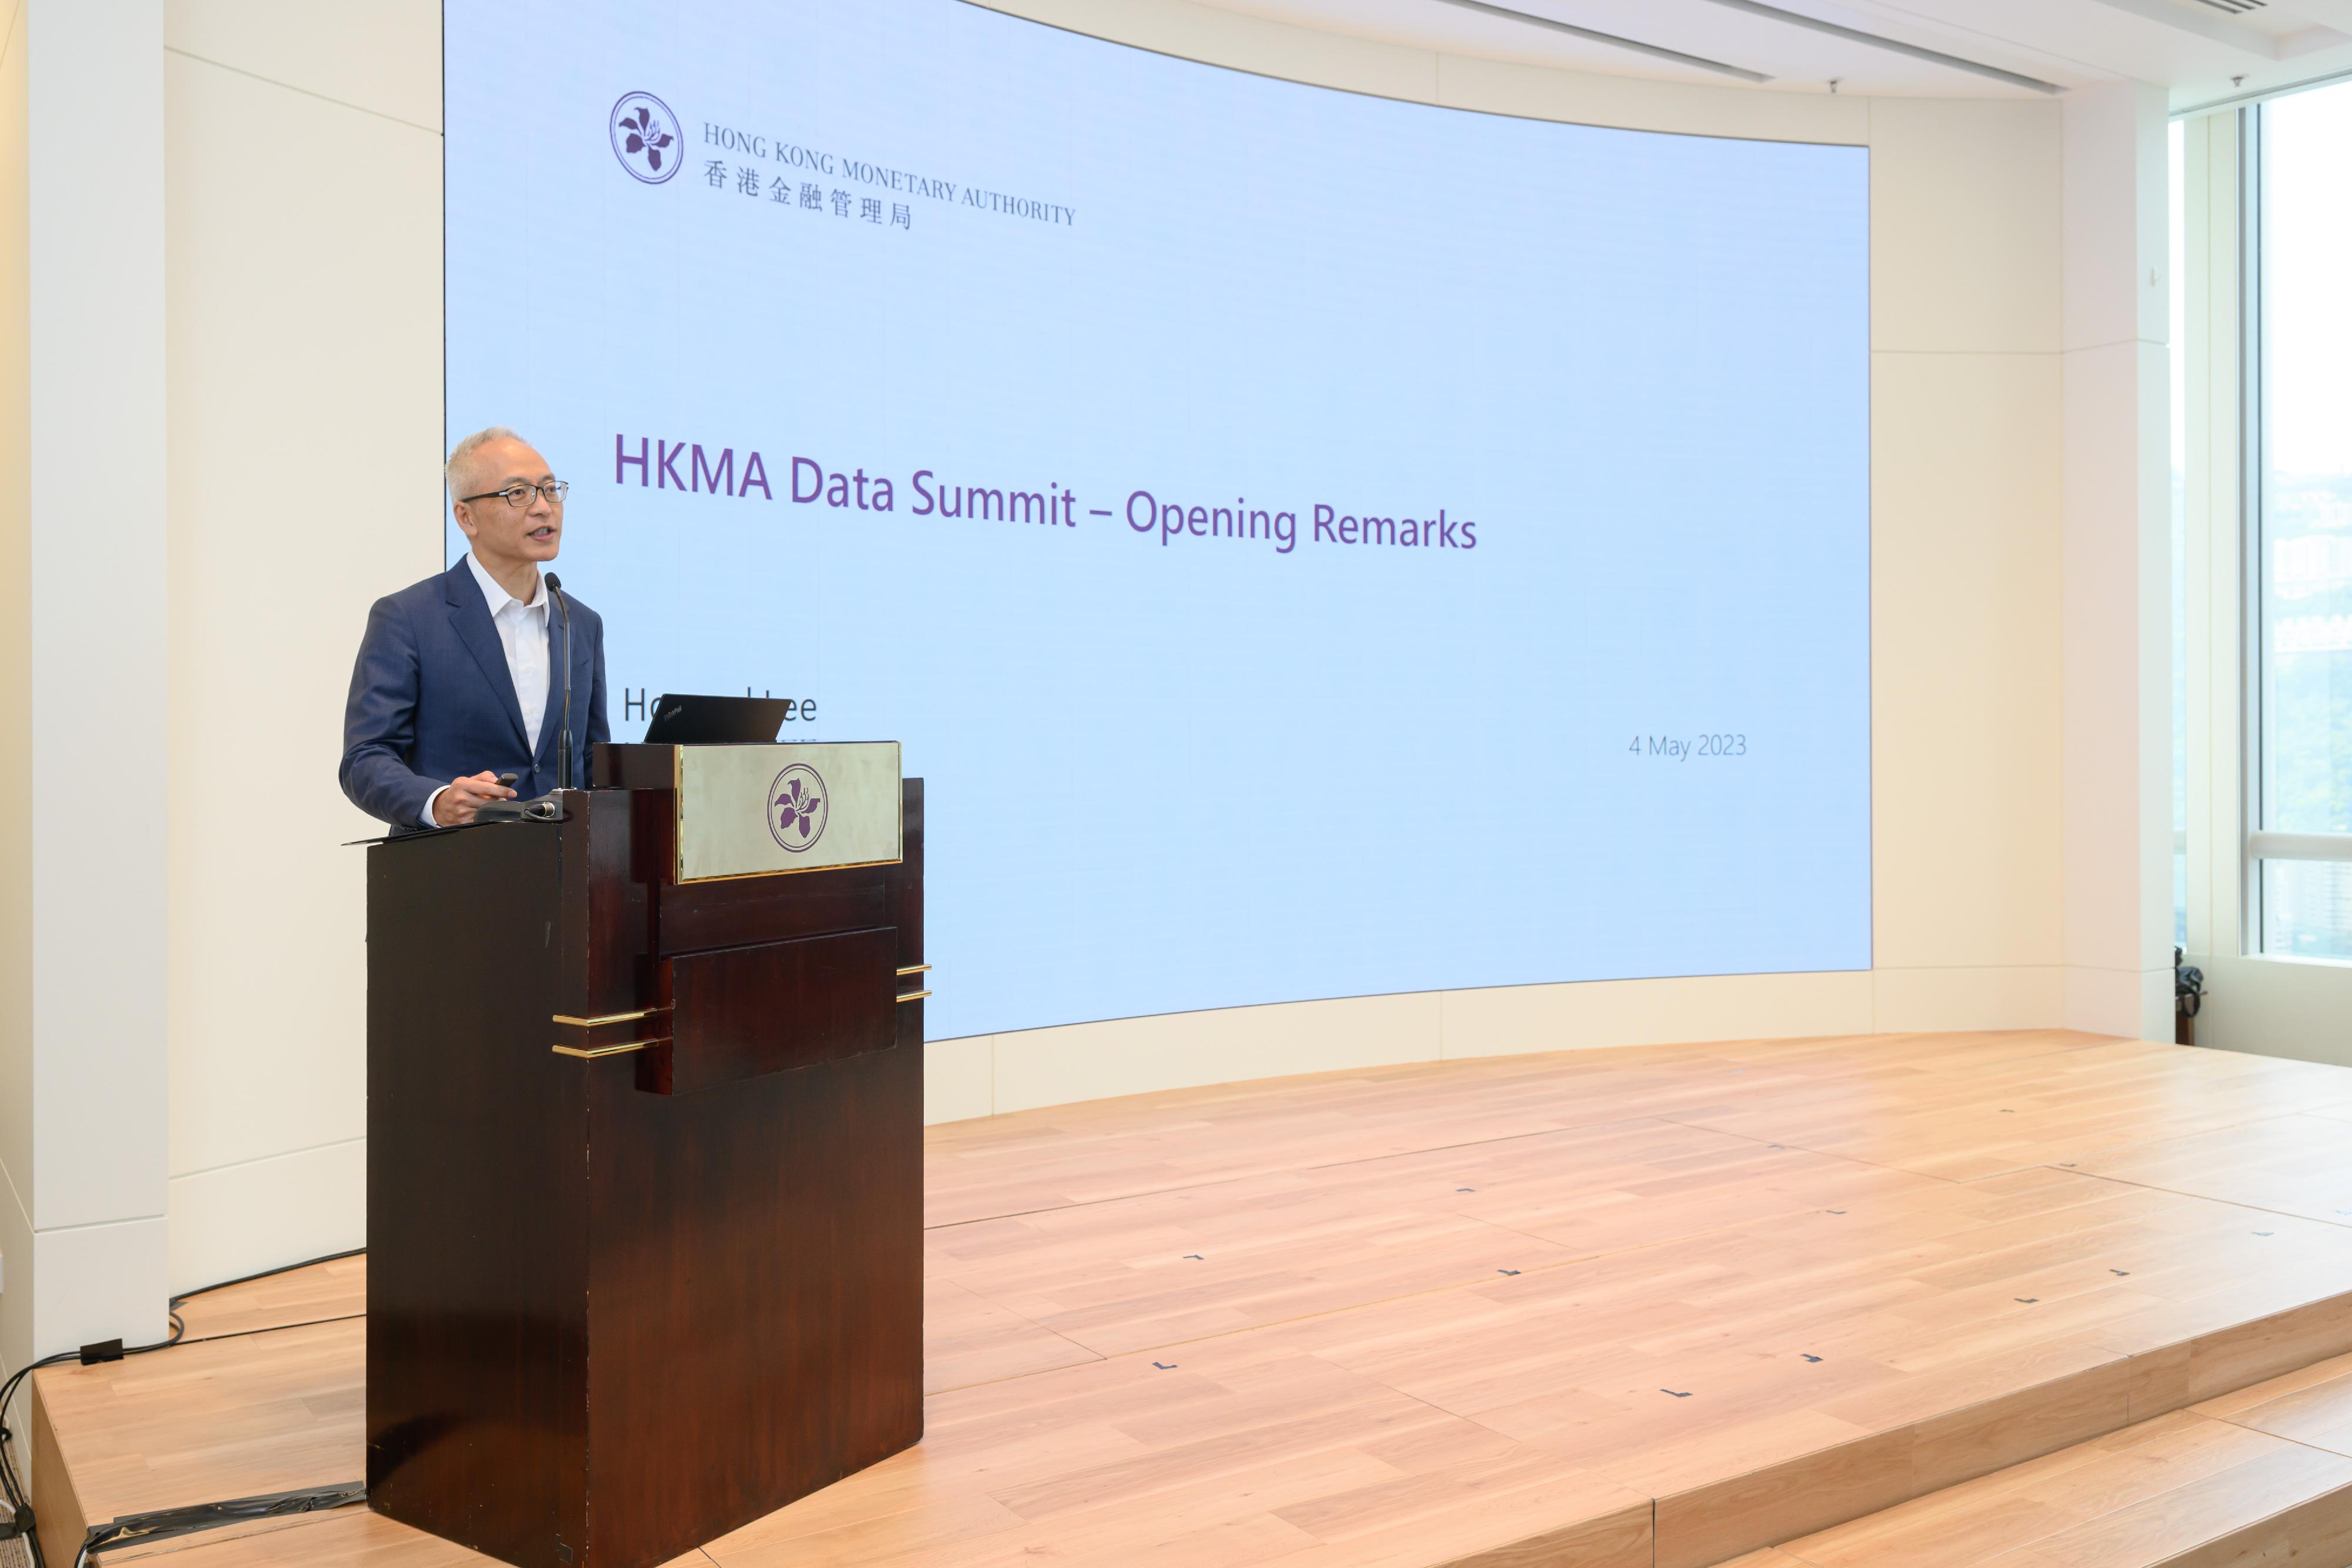 Deputy Chief Executive of the Hong Kong Monetary Authority Mr Howard Lee delivers opening remarks at the Data Summit today (May 4).